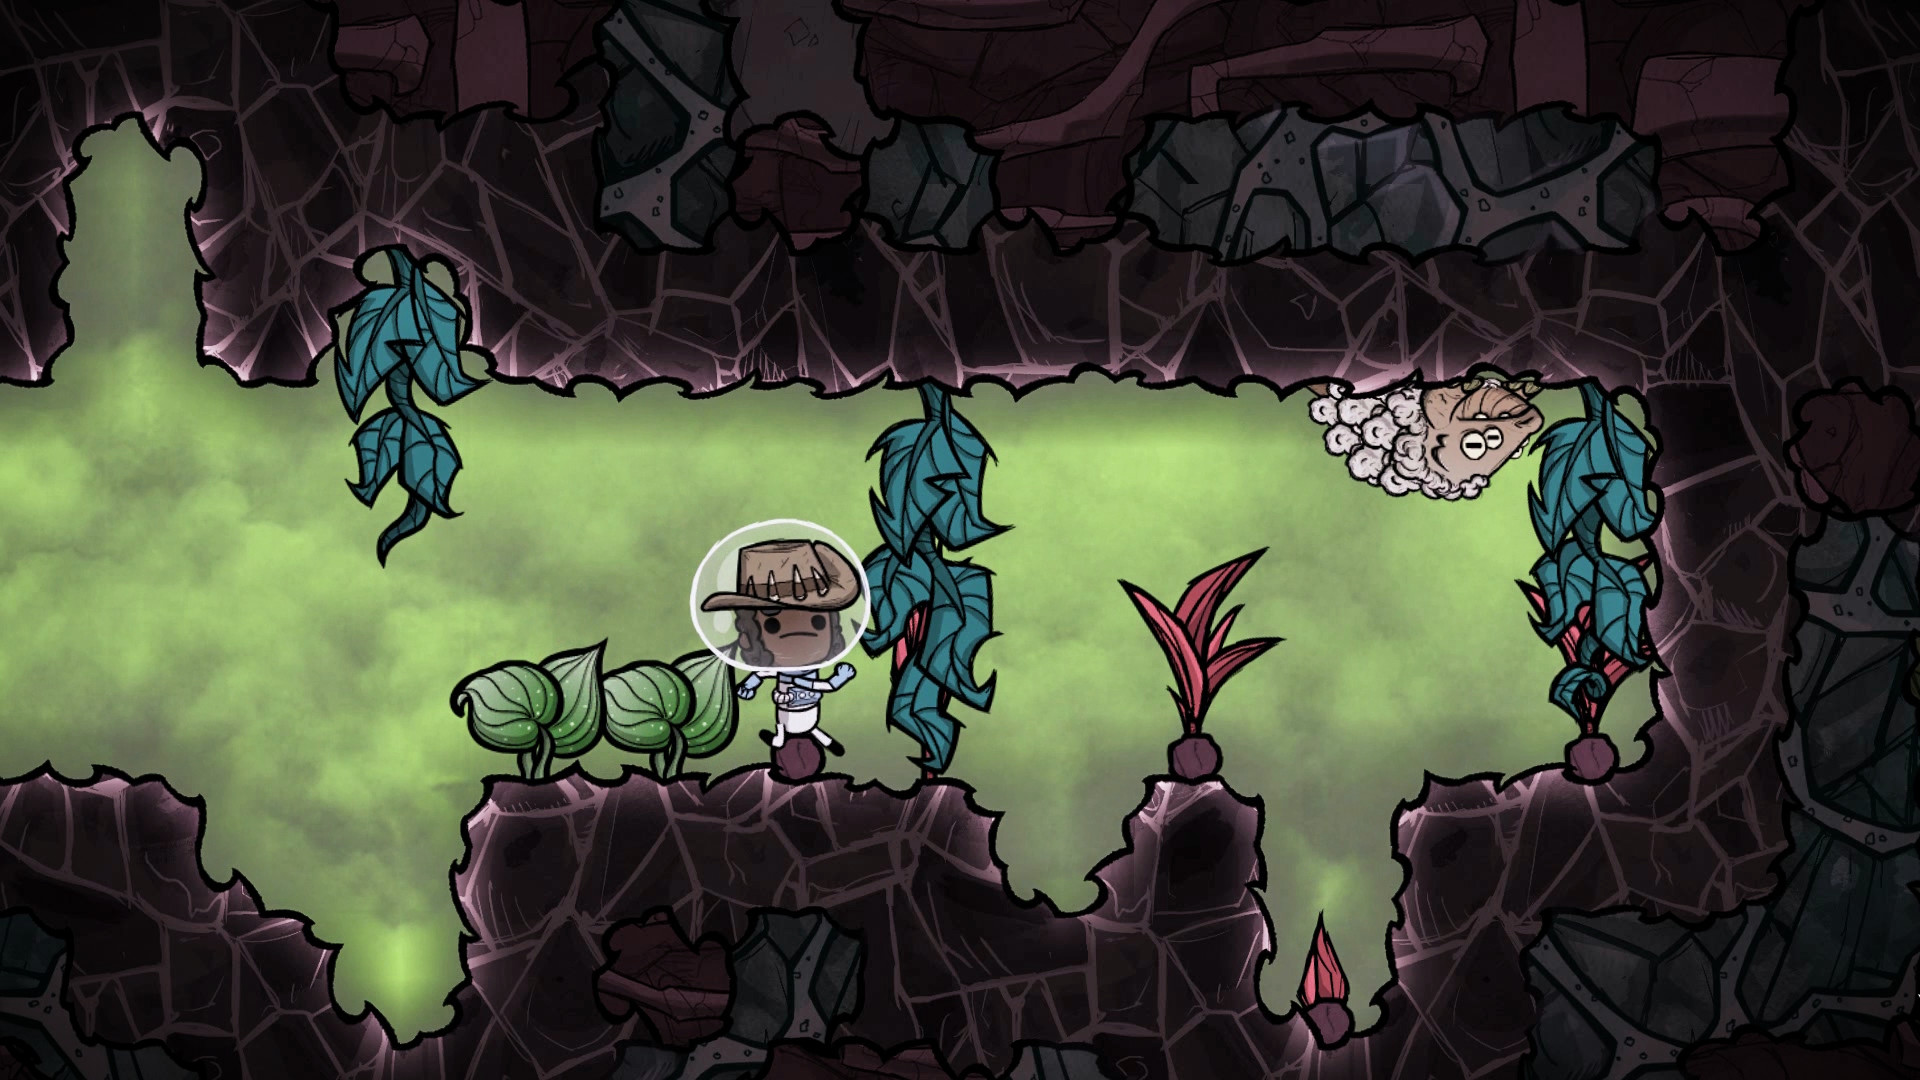 Oxygen Not Included Free Download